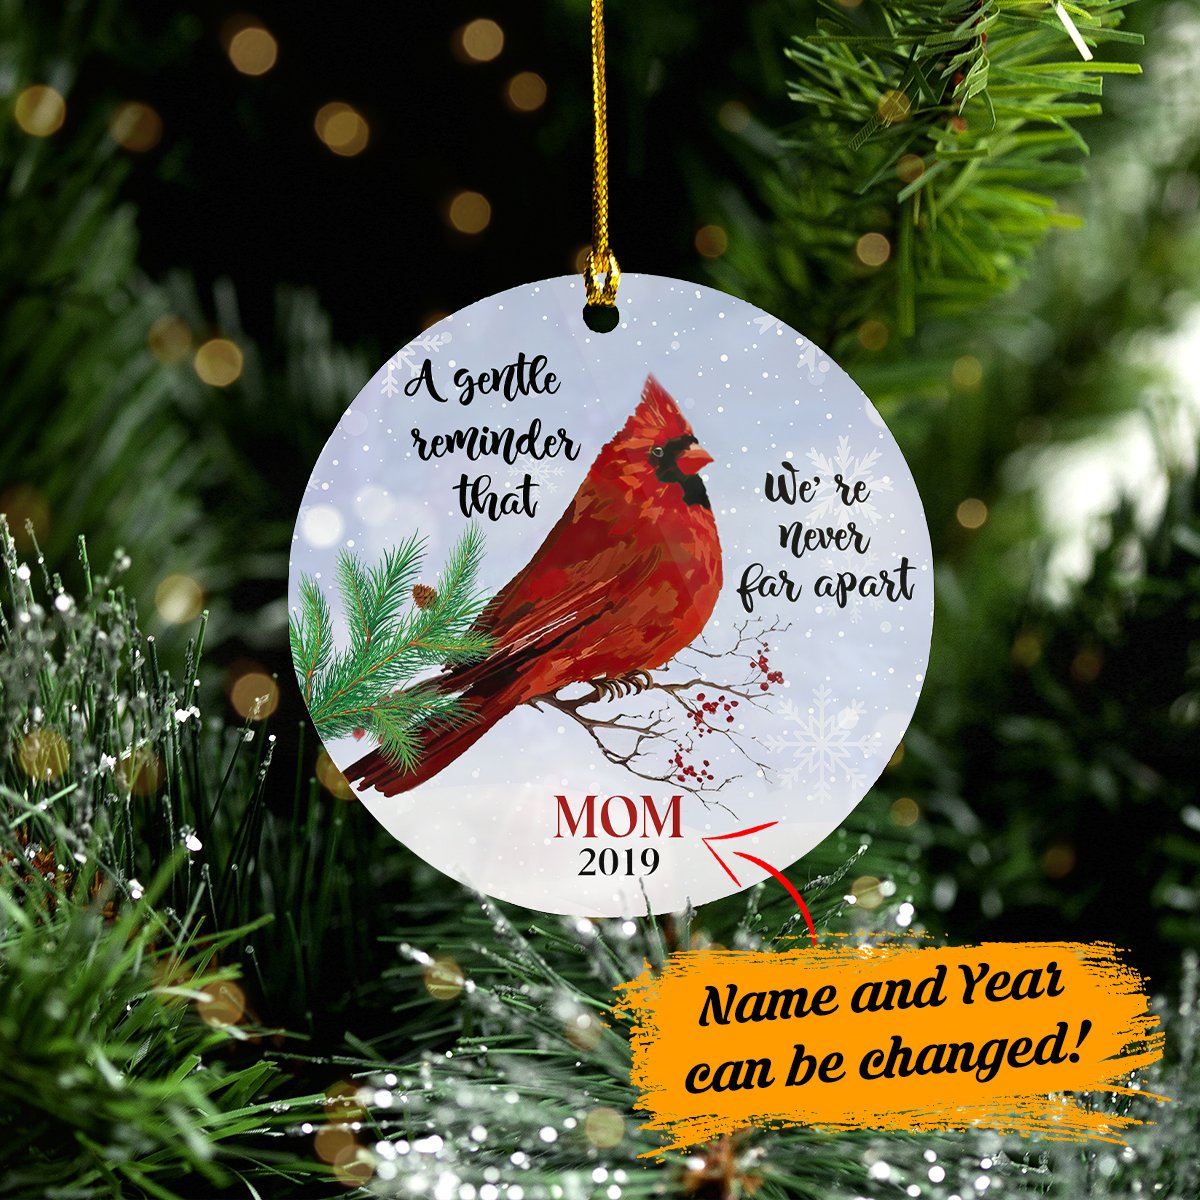 Cardinal We Are Never Far Apart - Personalized Memorial Ornament (Printed On Both Sides) 1022